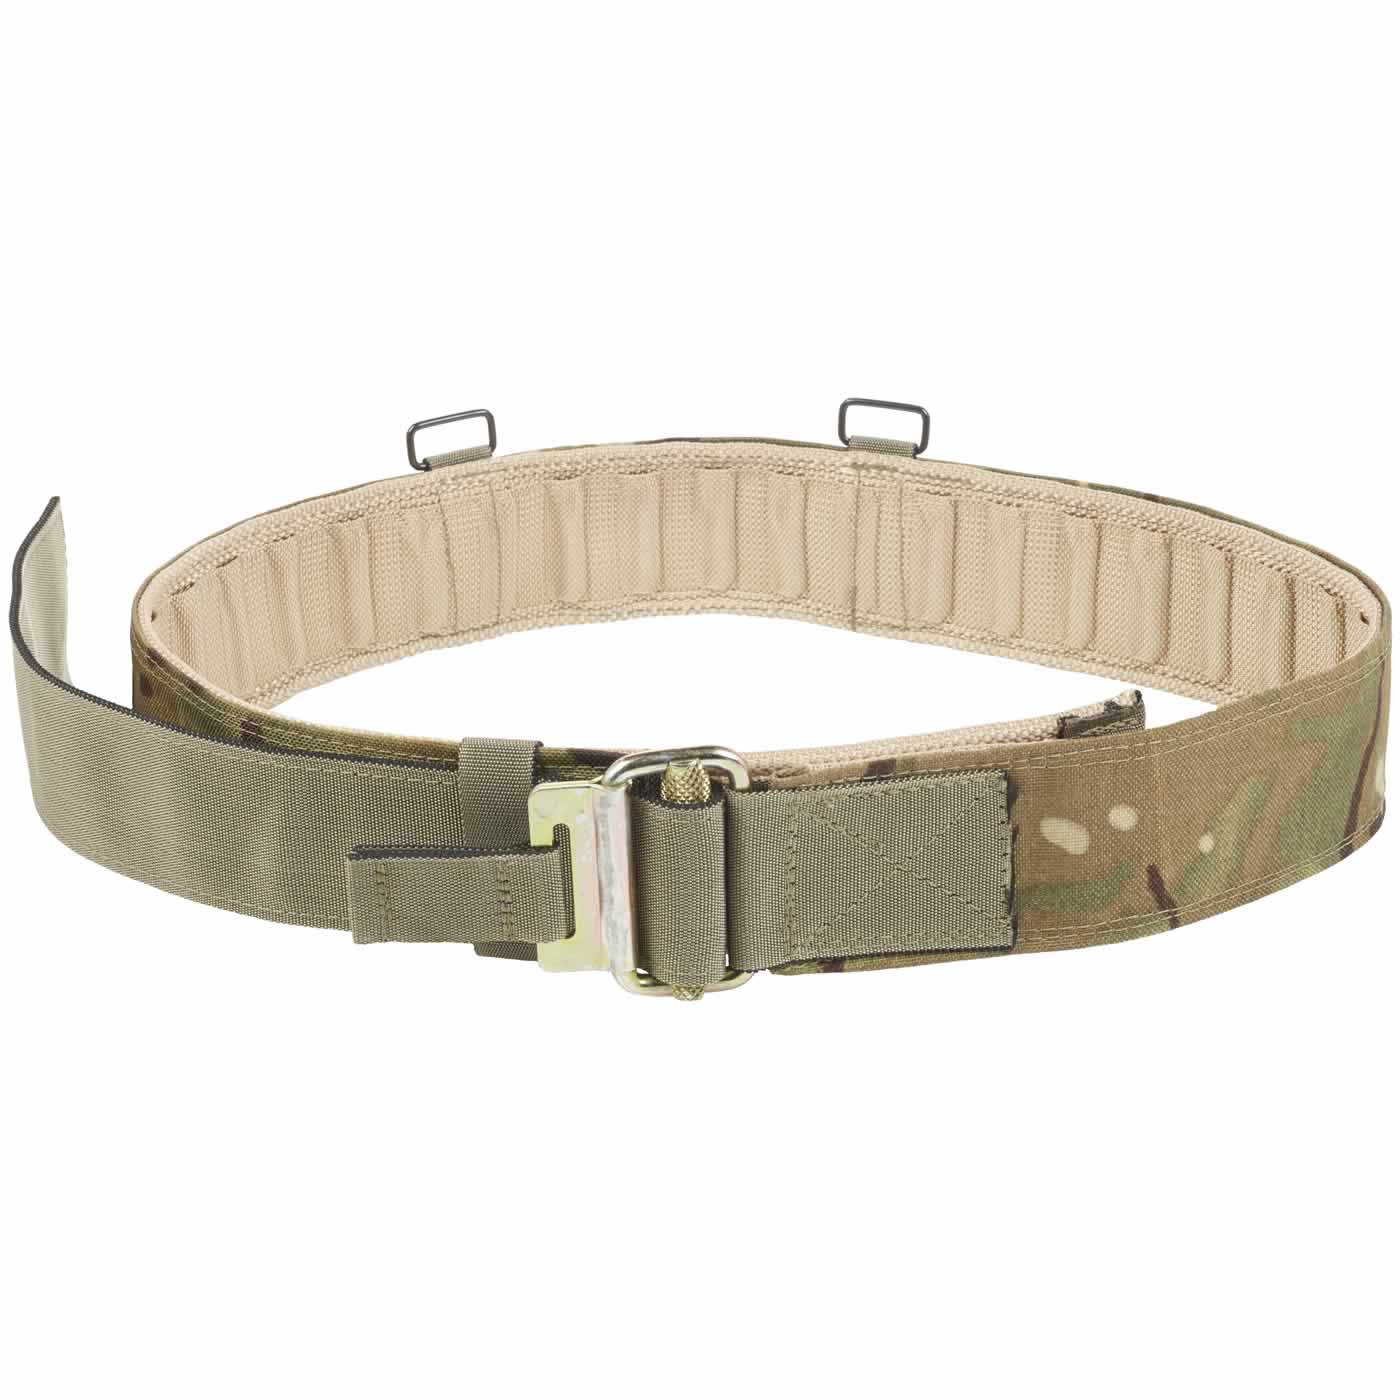 British Army Military GREEN PLCE BELT Adjustable LTS31 Size LARGE USED